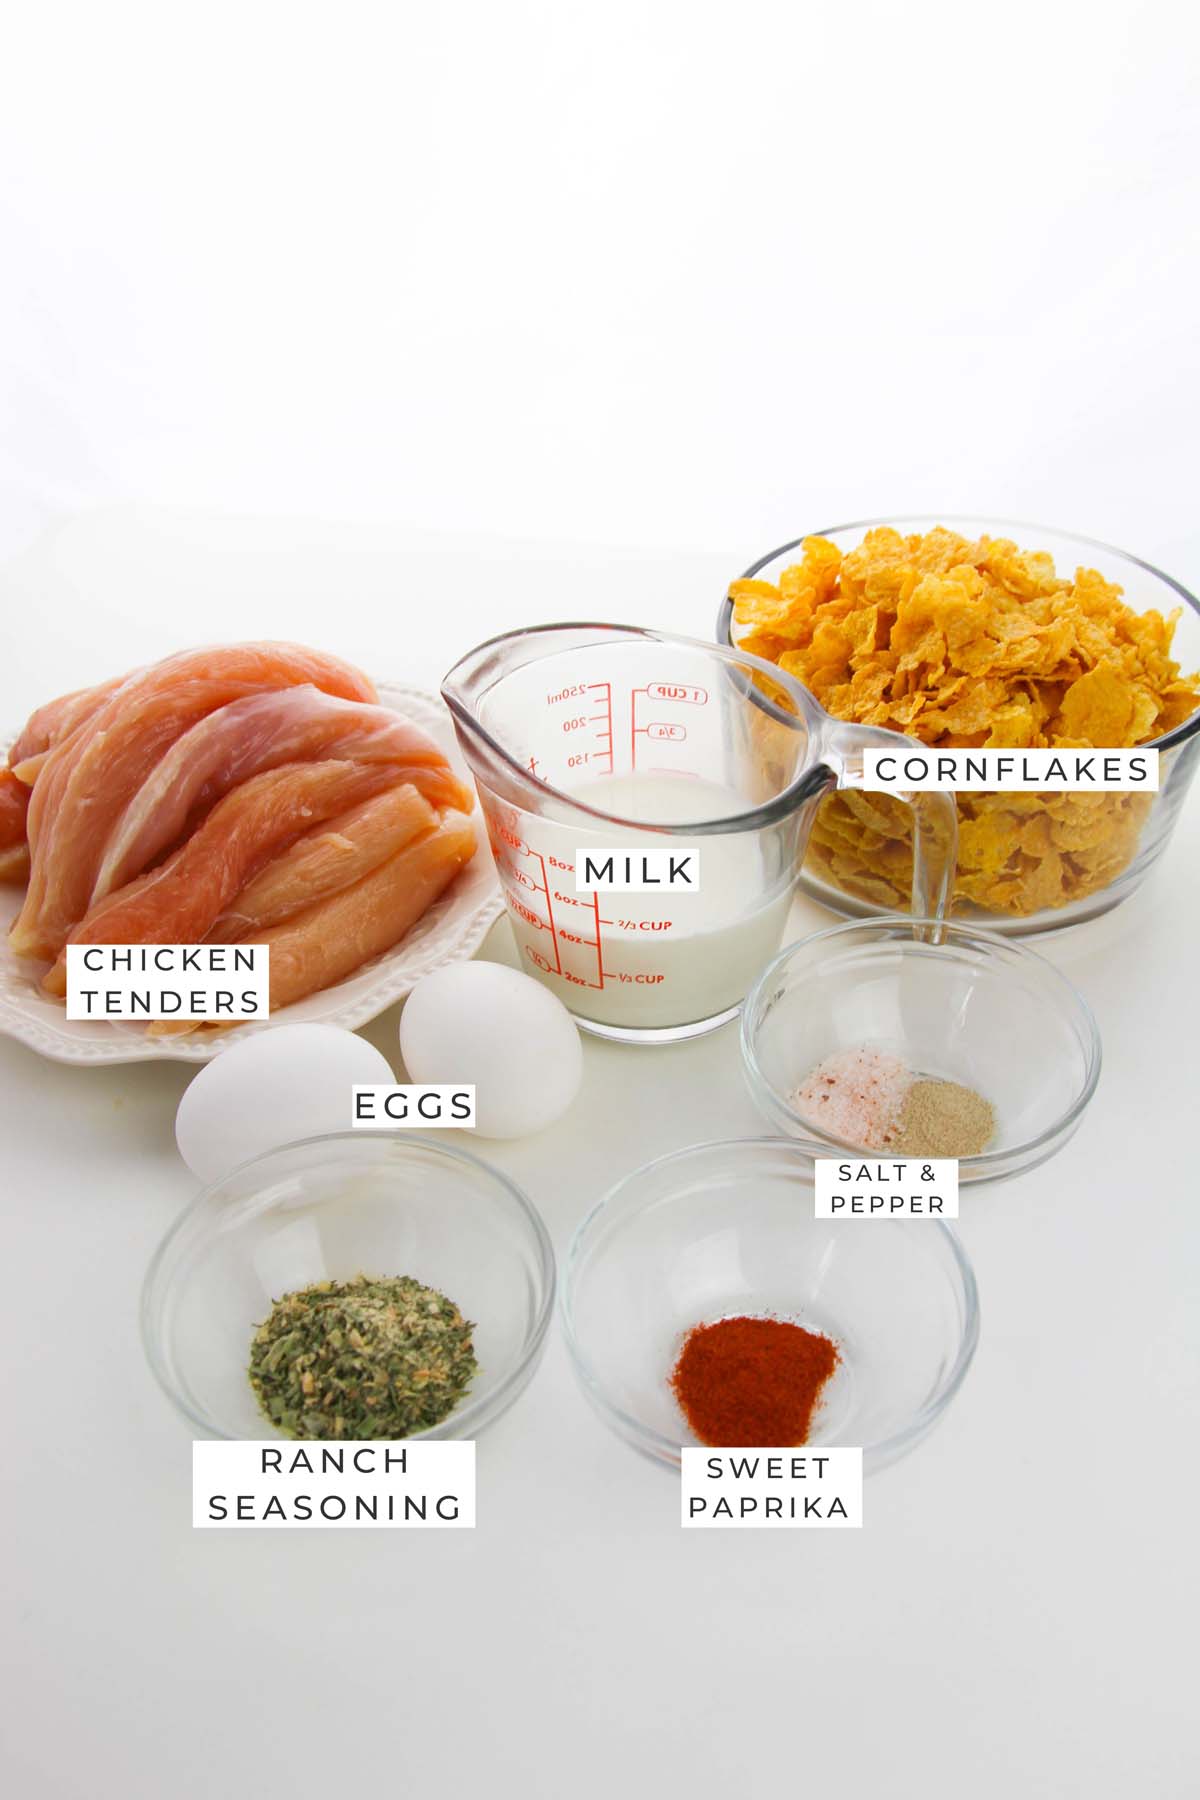 Labeled ingredients for the chicken tenders.